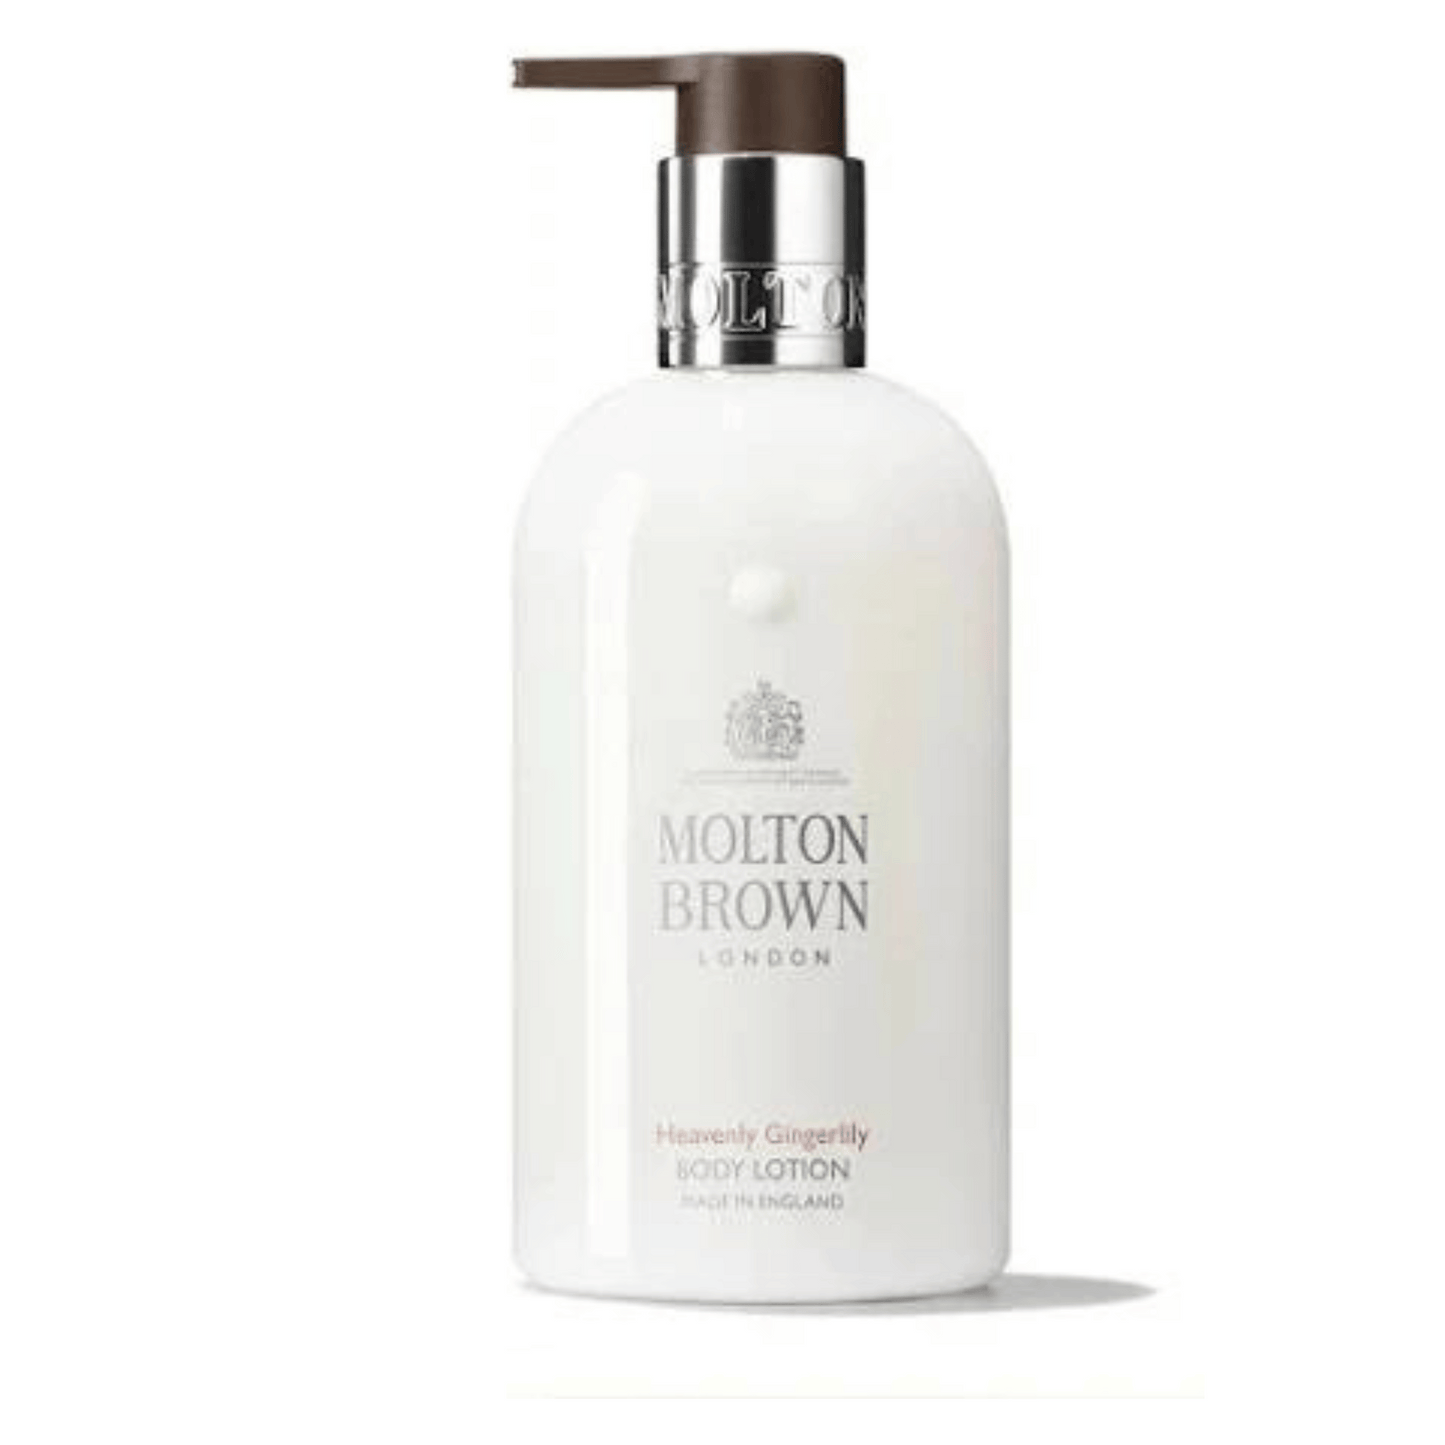 Primary Image of Heavenly Gingerlily Body Lotion